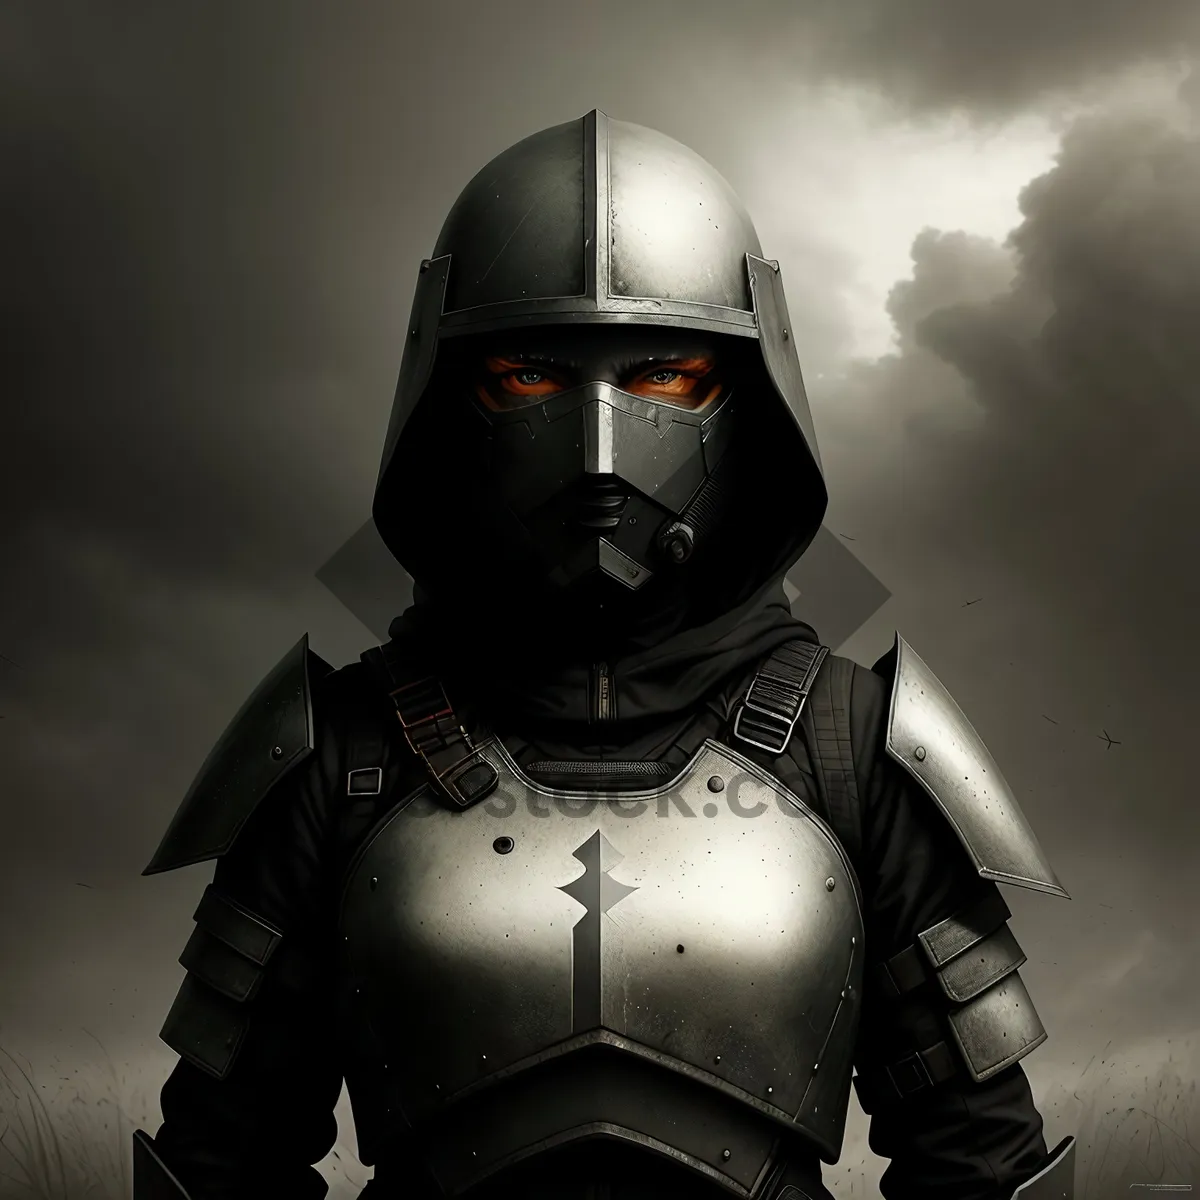 Picture of Warrior's Protective Helmet: Armored Mask for Safety